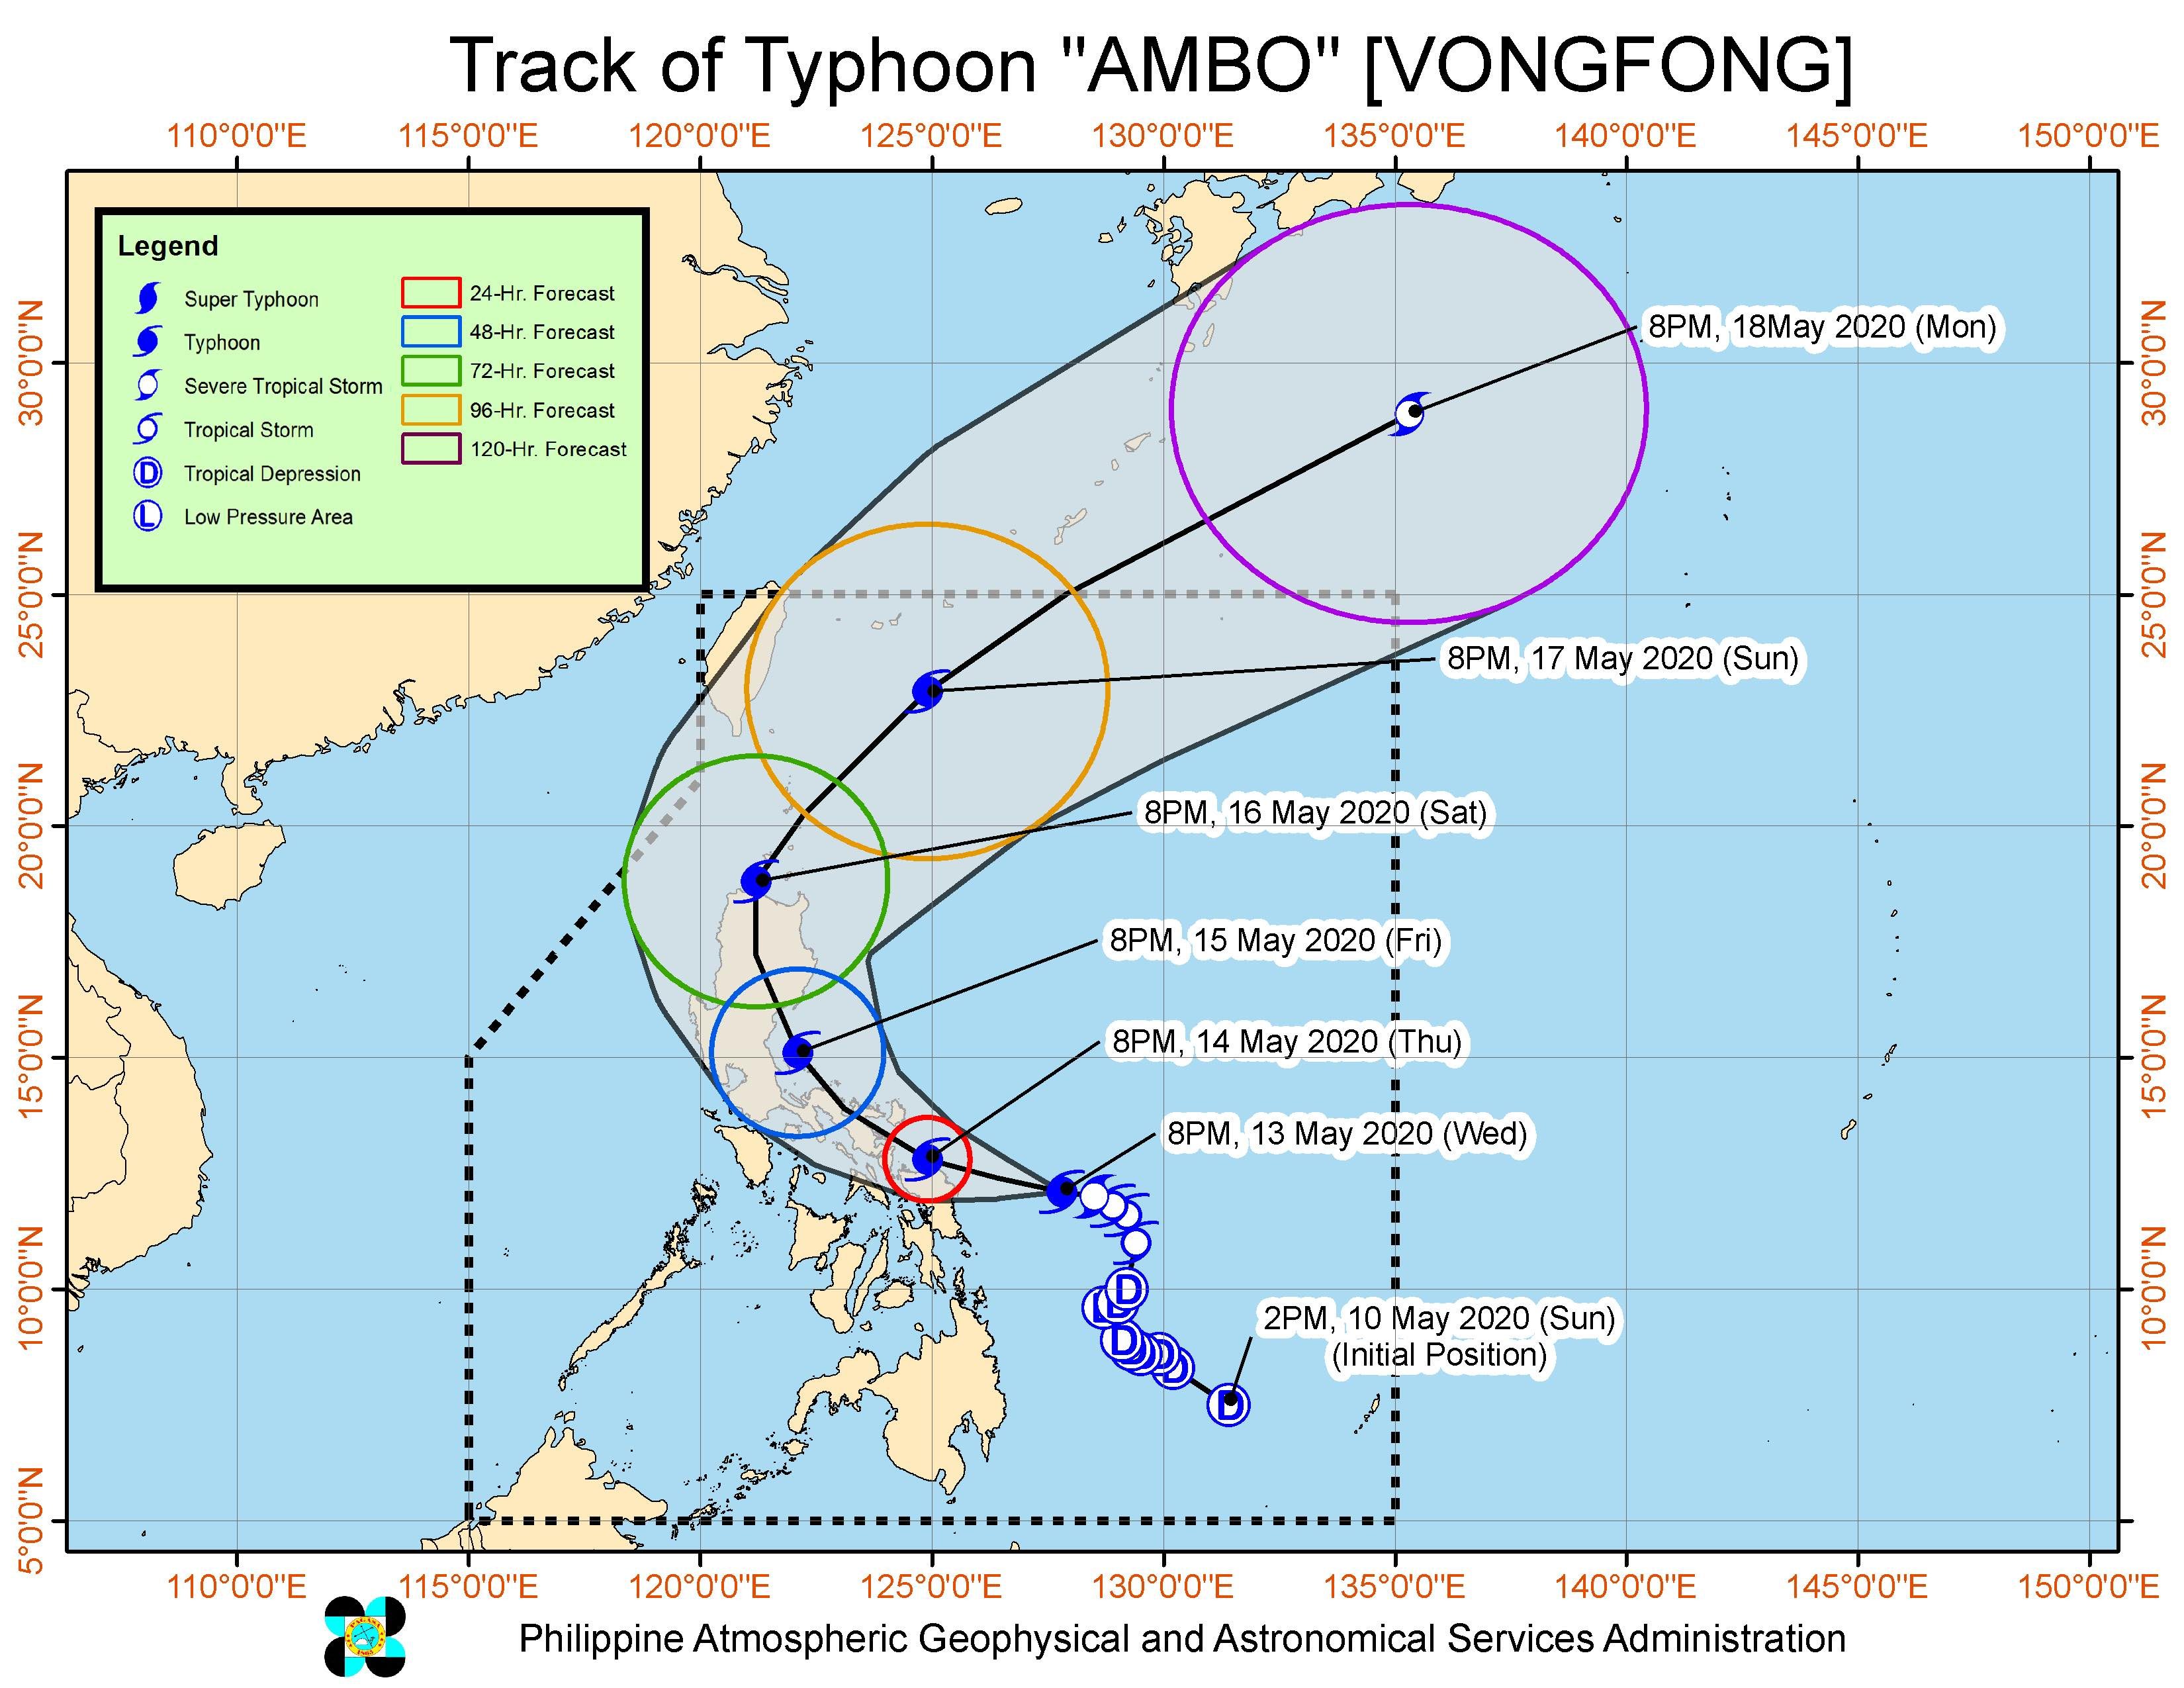 Forecast track of Typhoon Ambo (Vongfong) as of May 13, 2020, 11 pm. Image from PAGASA 